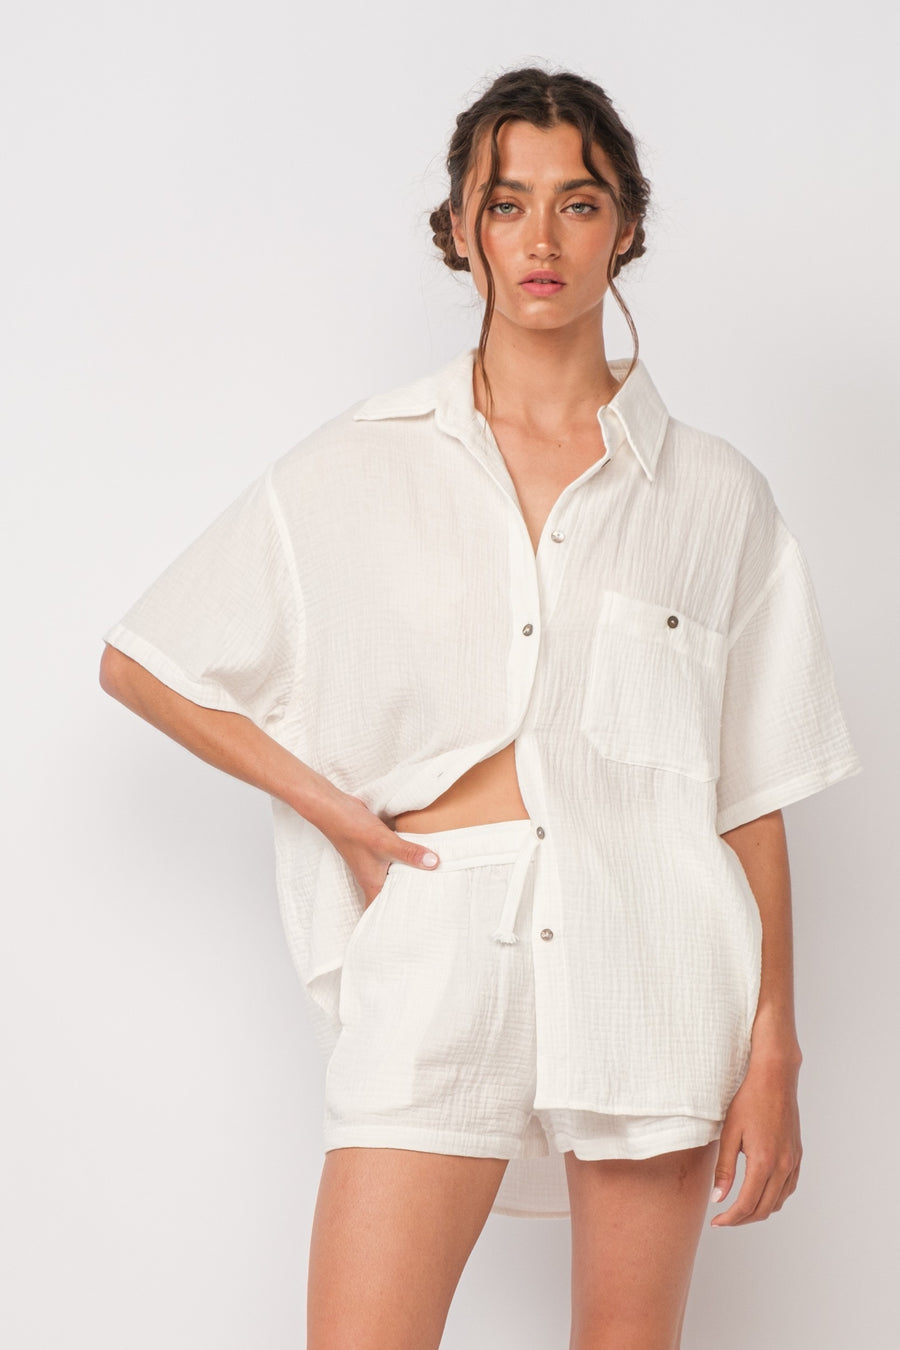 white short sleeve shirt with collar.